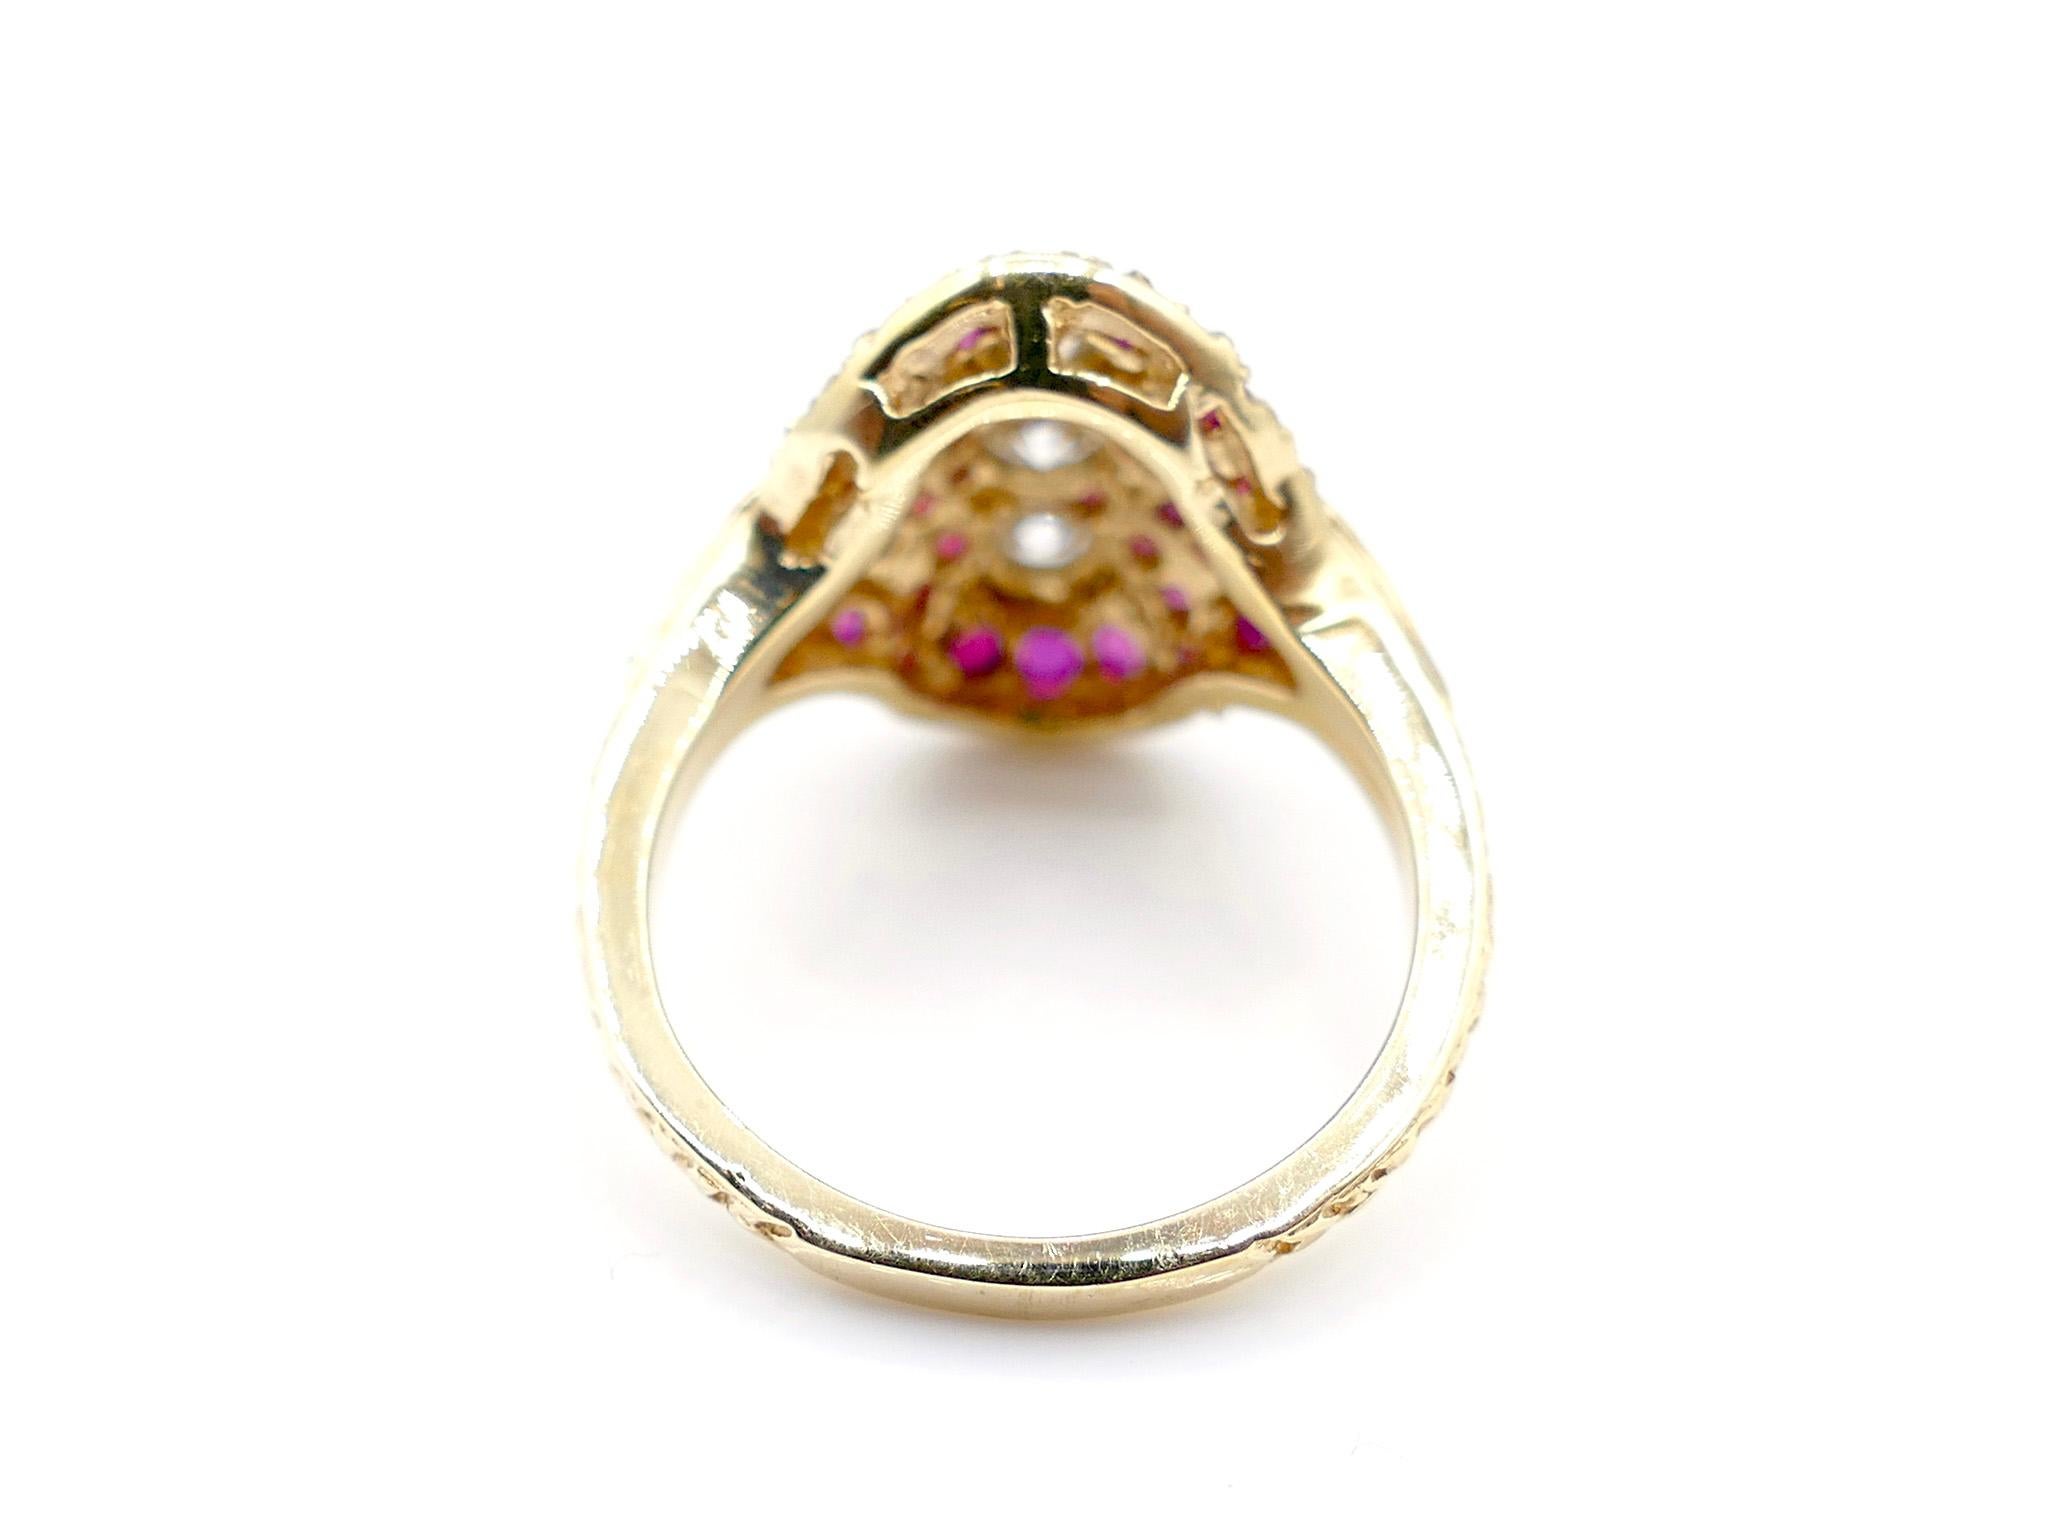 Retro Antique Style 3 Diamond and Rubies 14K Yellow Gold Ring For Sale